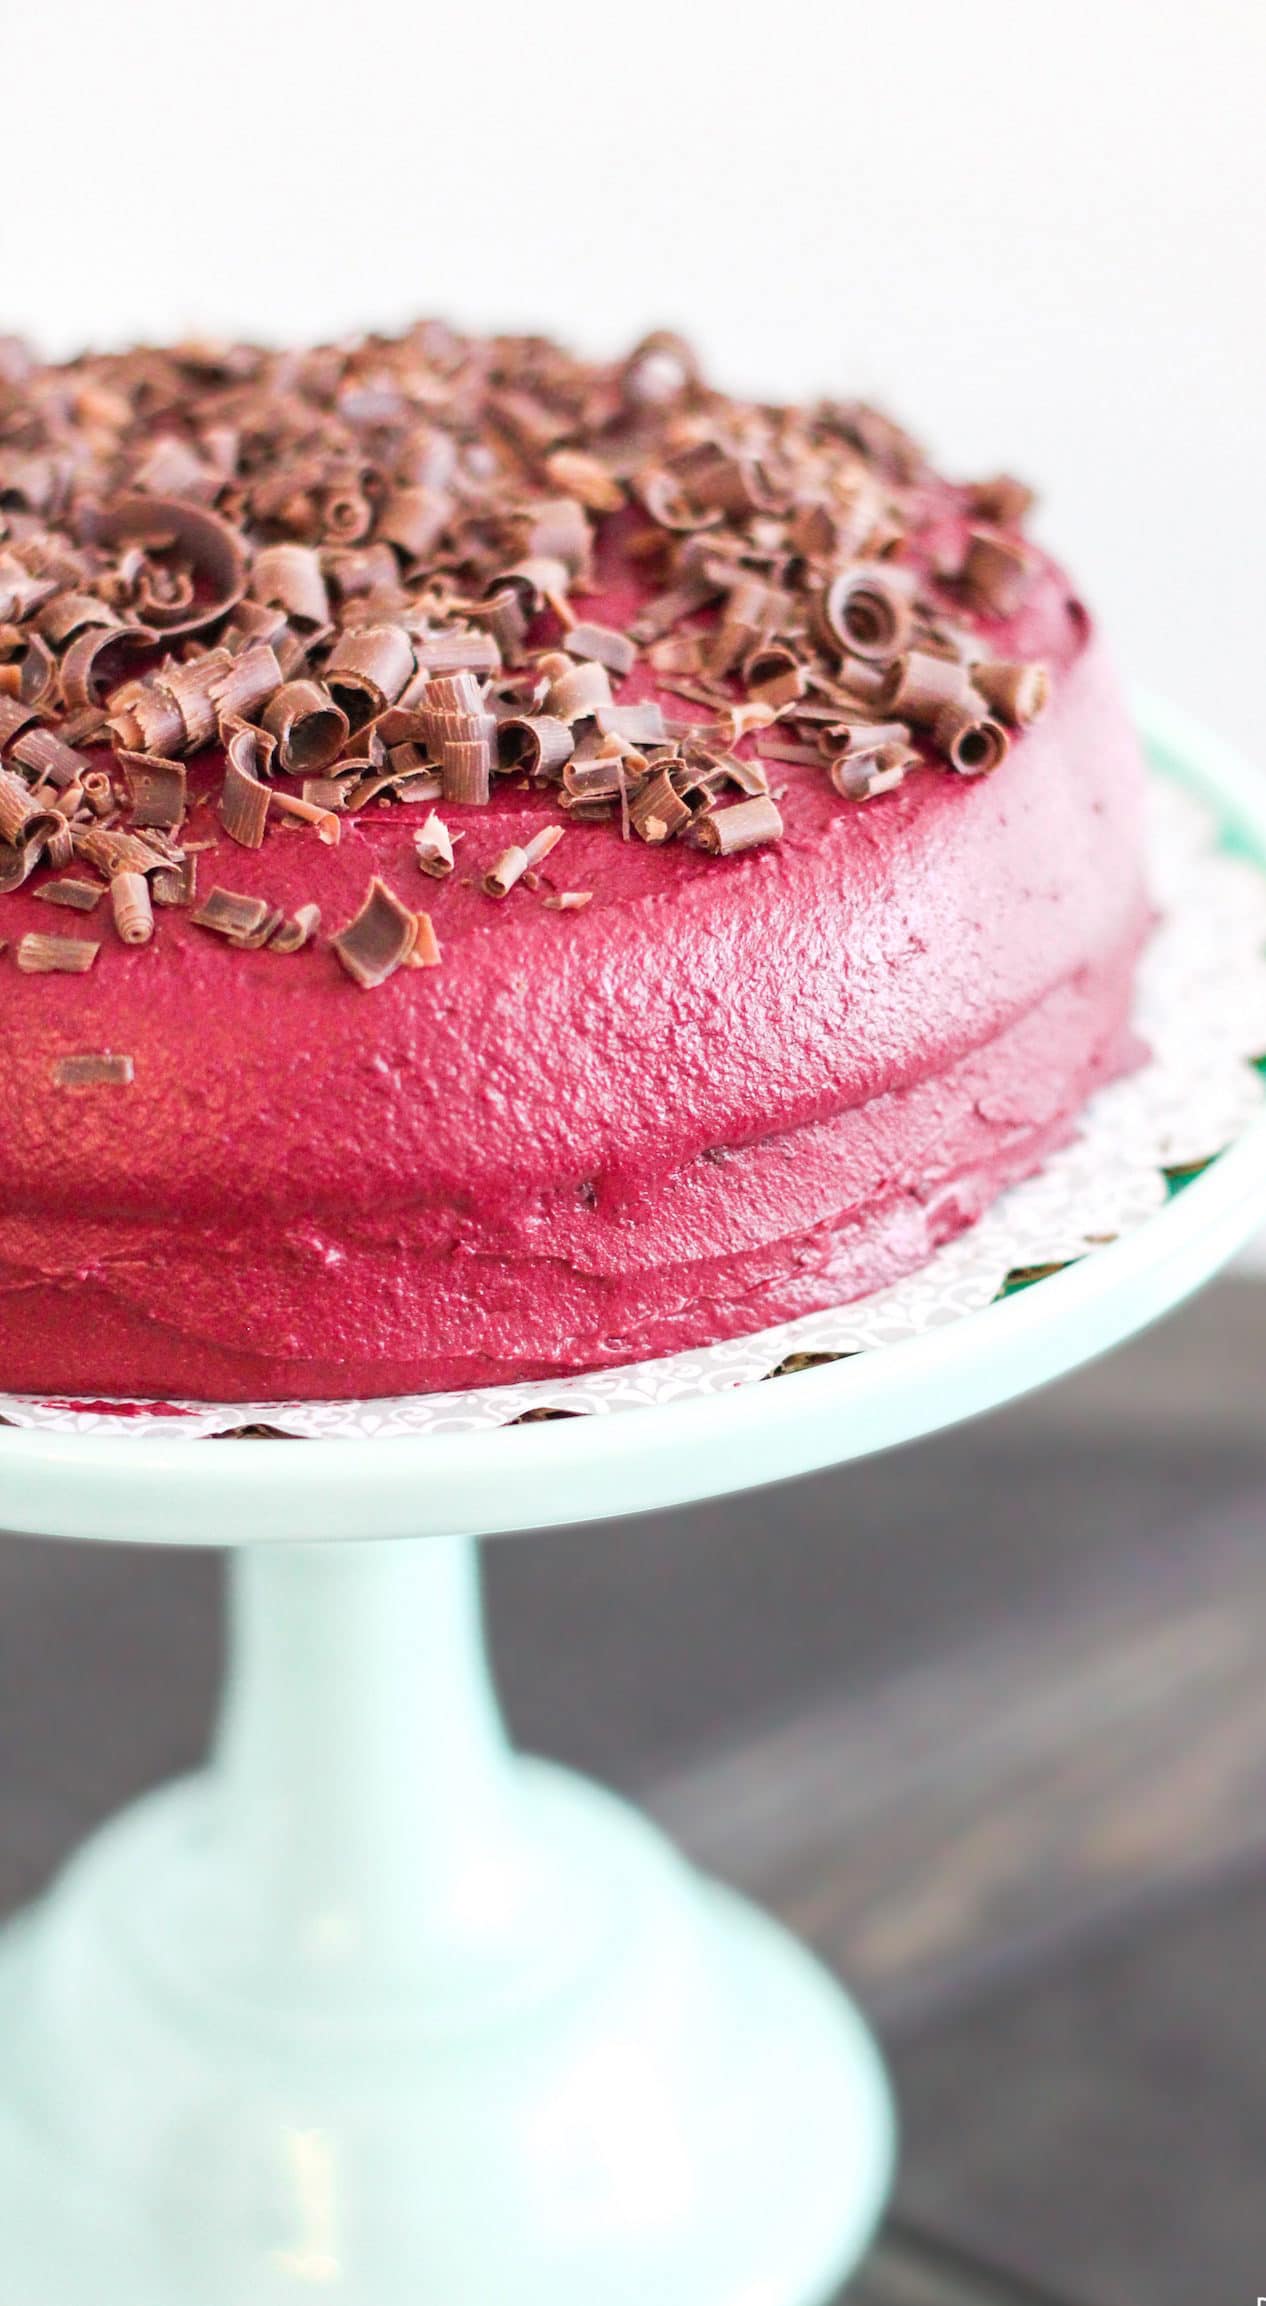 Healthy Devil’s Food Cake with Red Velvet Frosting (refined sugar free, low carb, high protein, high fiber, gluten free, dairy free, paleo) - Healthy Dessert Recipes at Desserts with Benefits